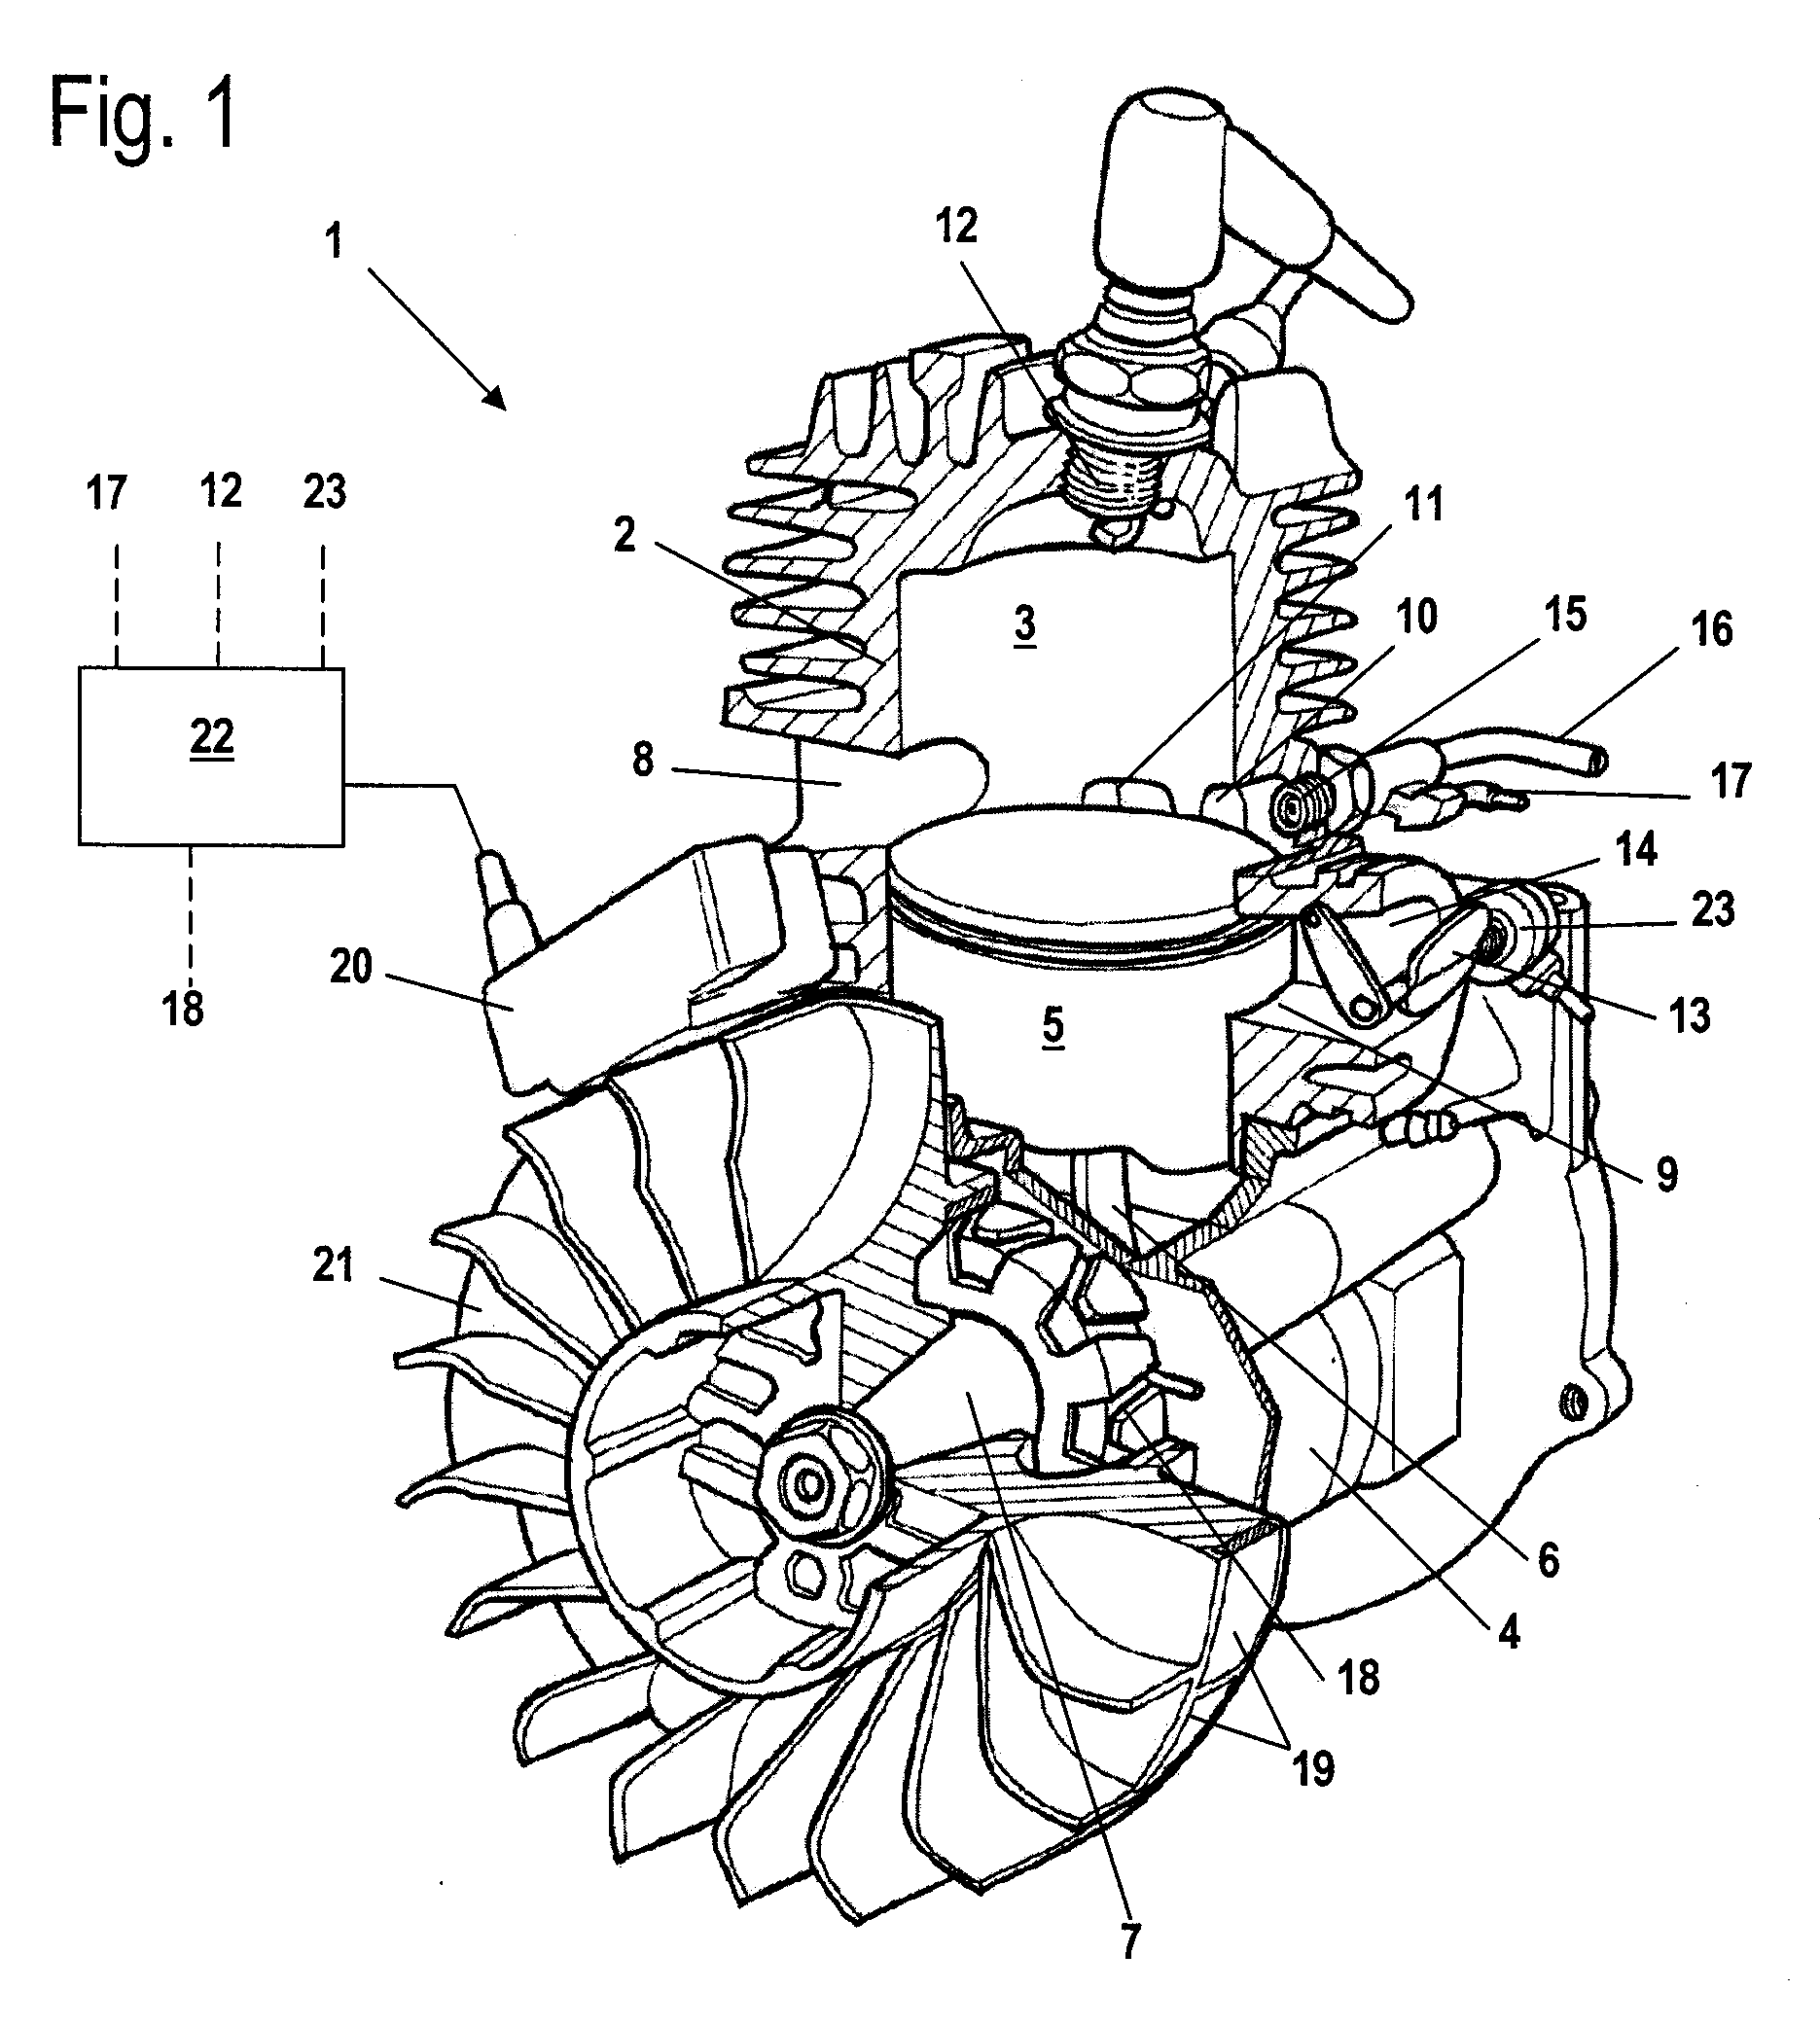 Method for Operating an Internal Combustion Engine